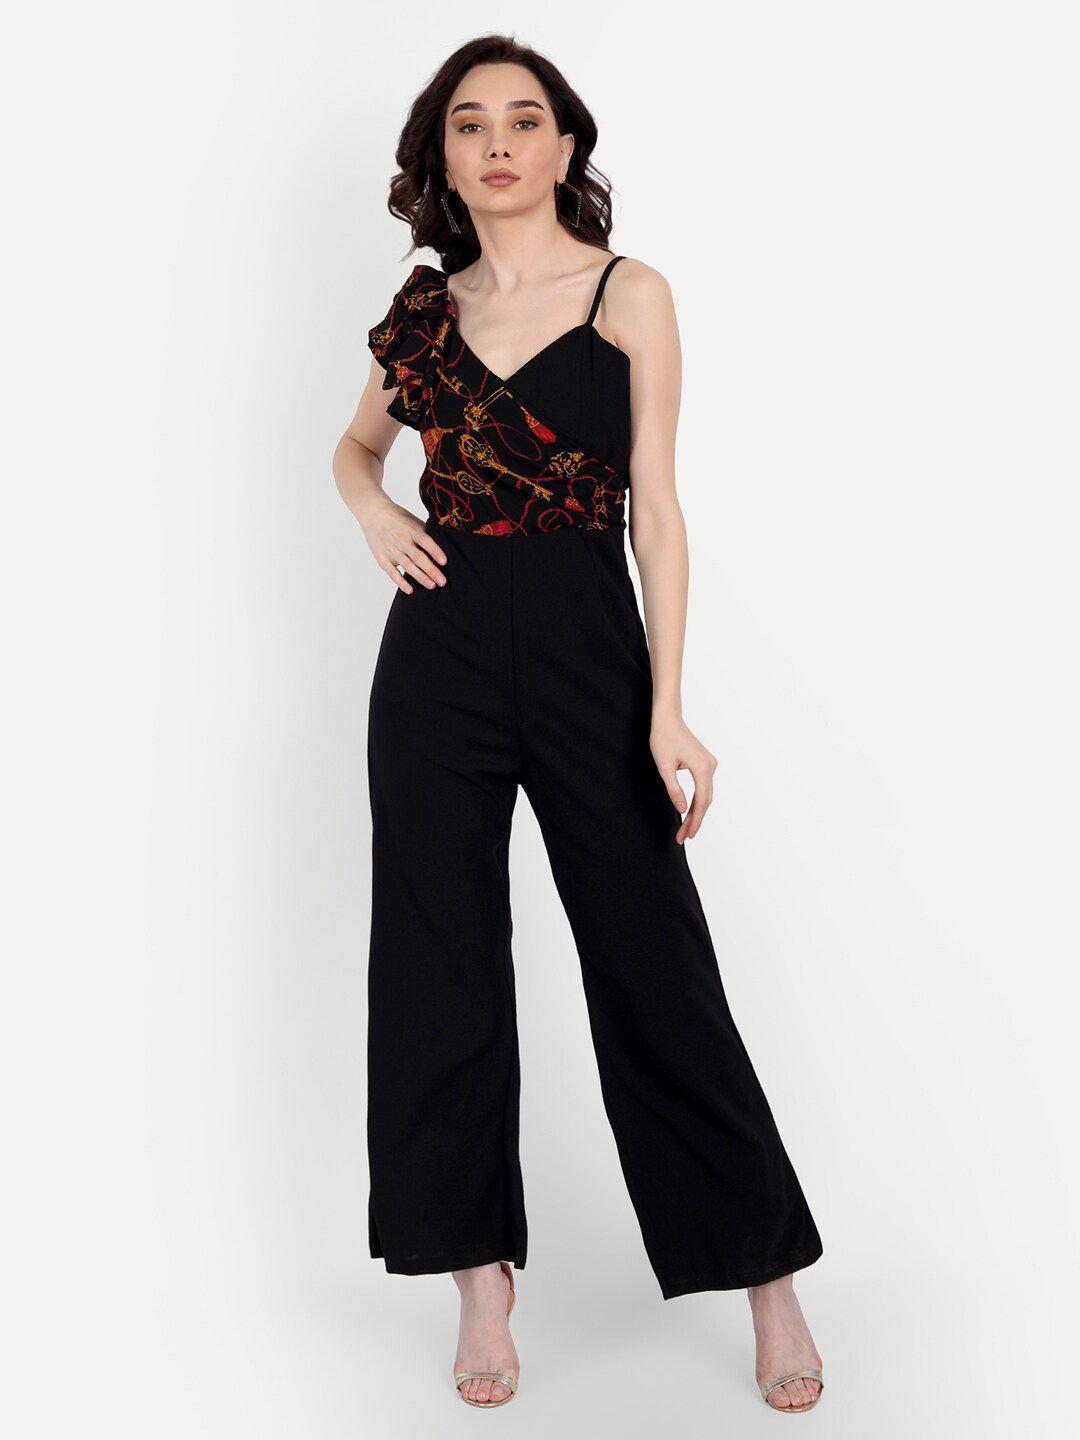 forevermore black & red printed basic jumpsuit with ruffles